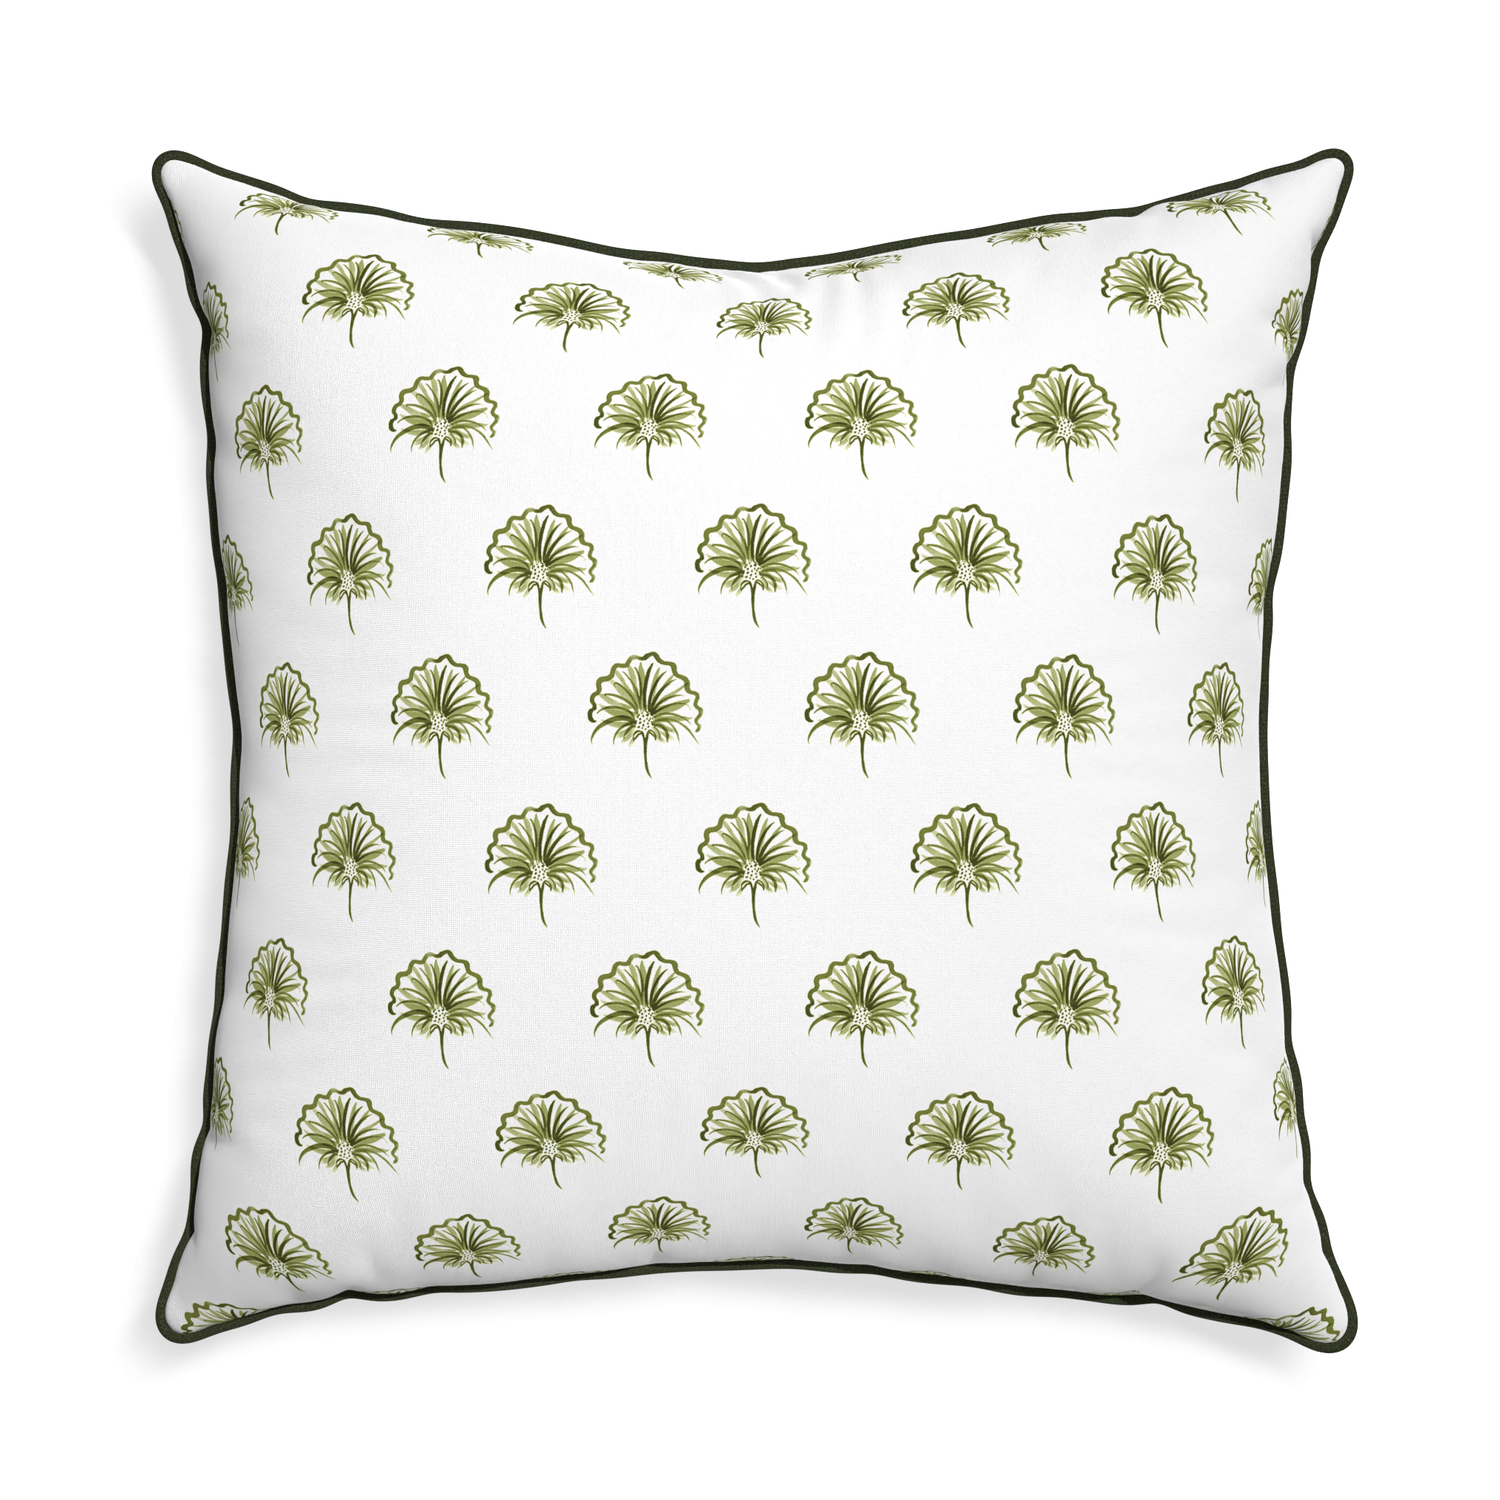 Euro-sham penelope moss custom green floralpillow with f piping on white background